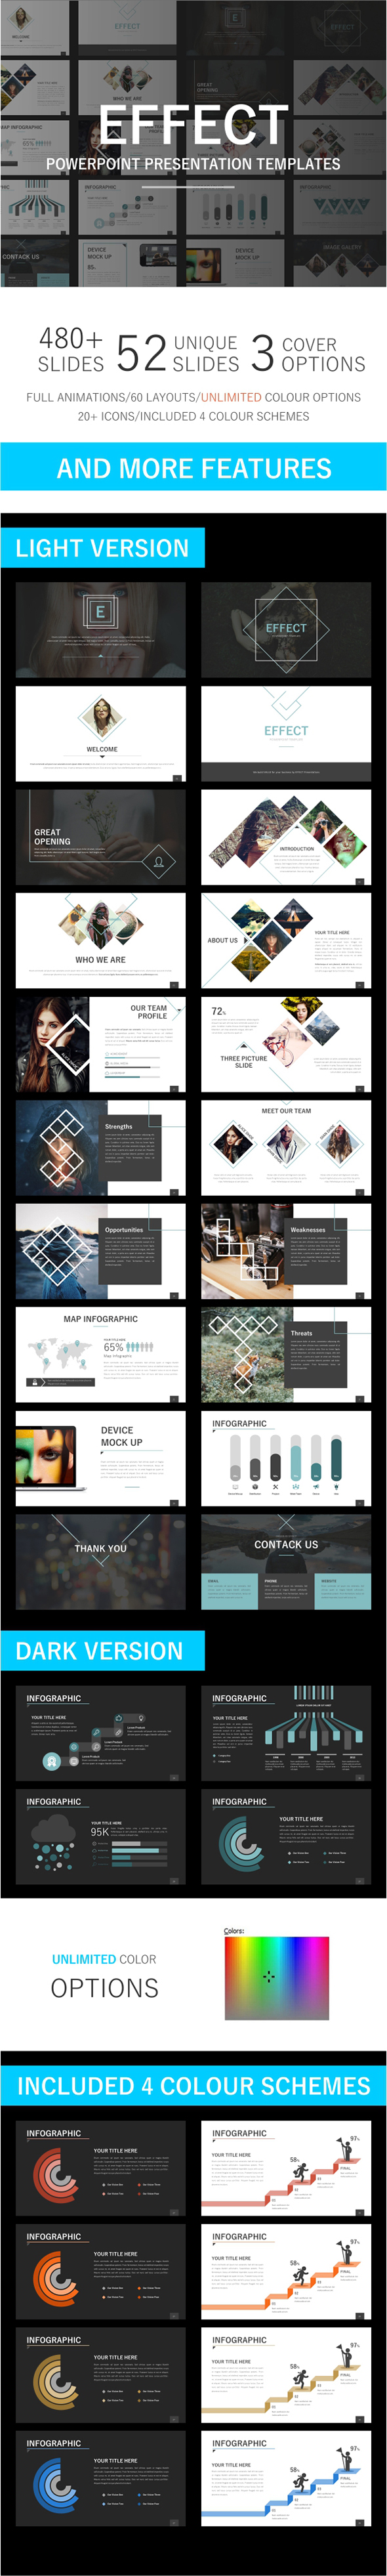 Effect Powerpoint Template